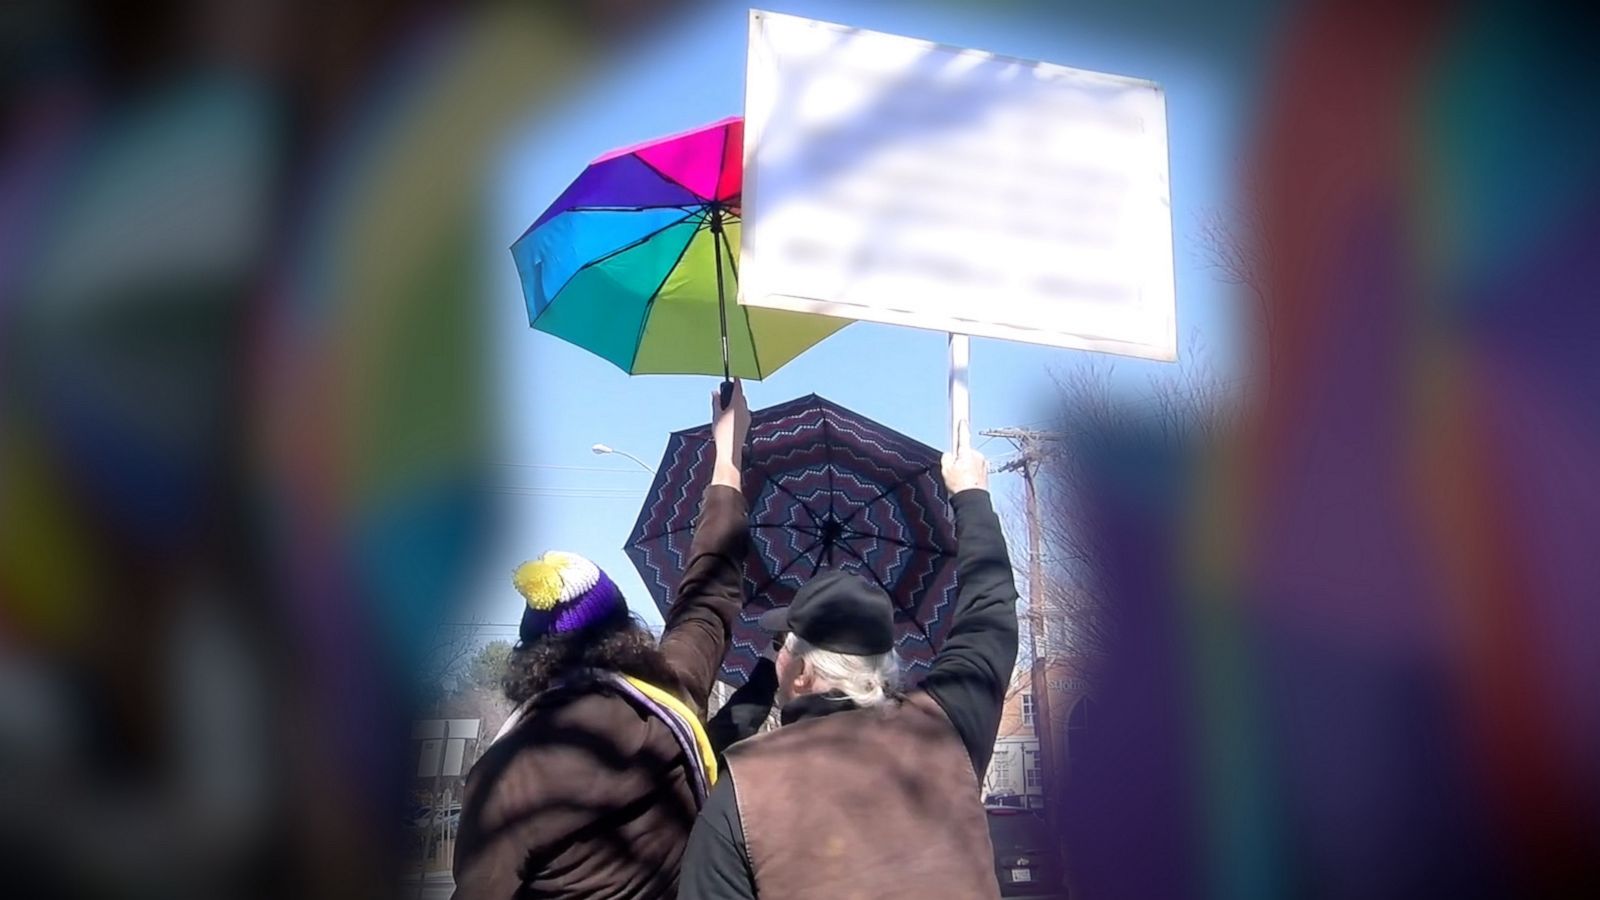 VIDEO: First came protests at all ages drag show. Then, came the rainbow umbrellas